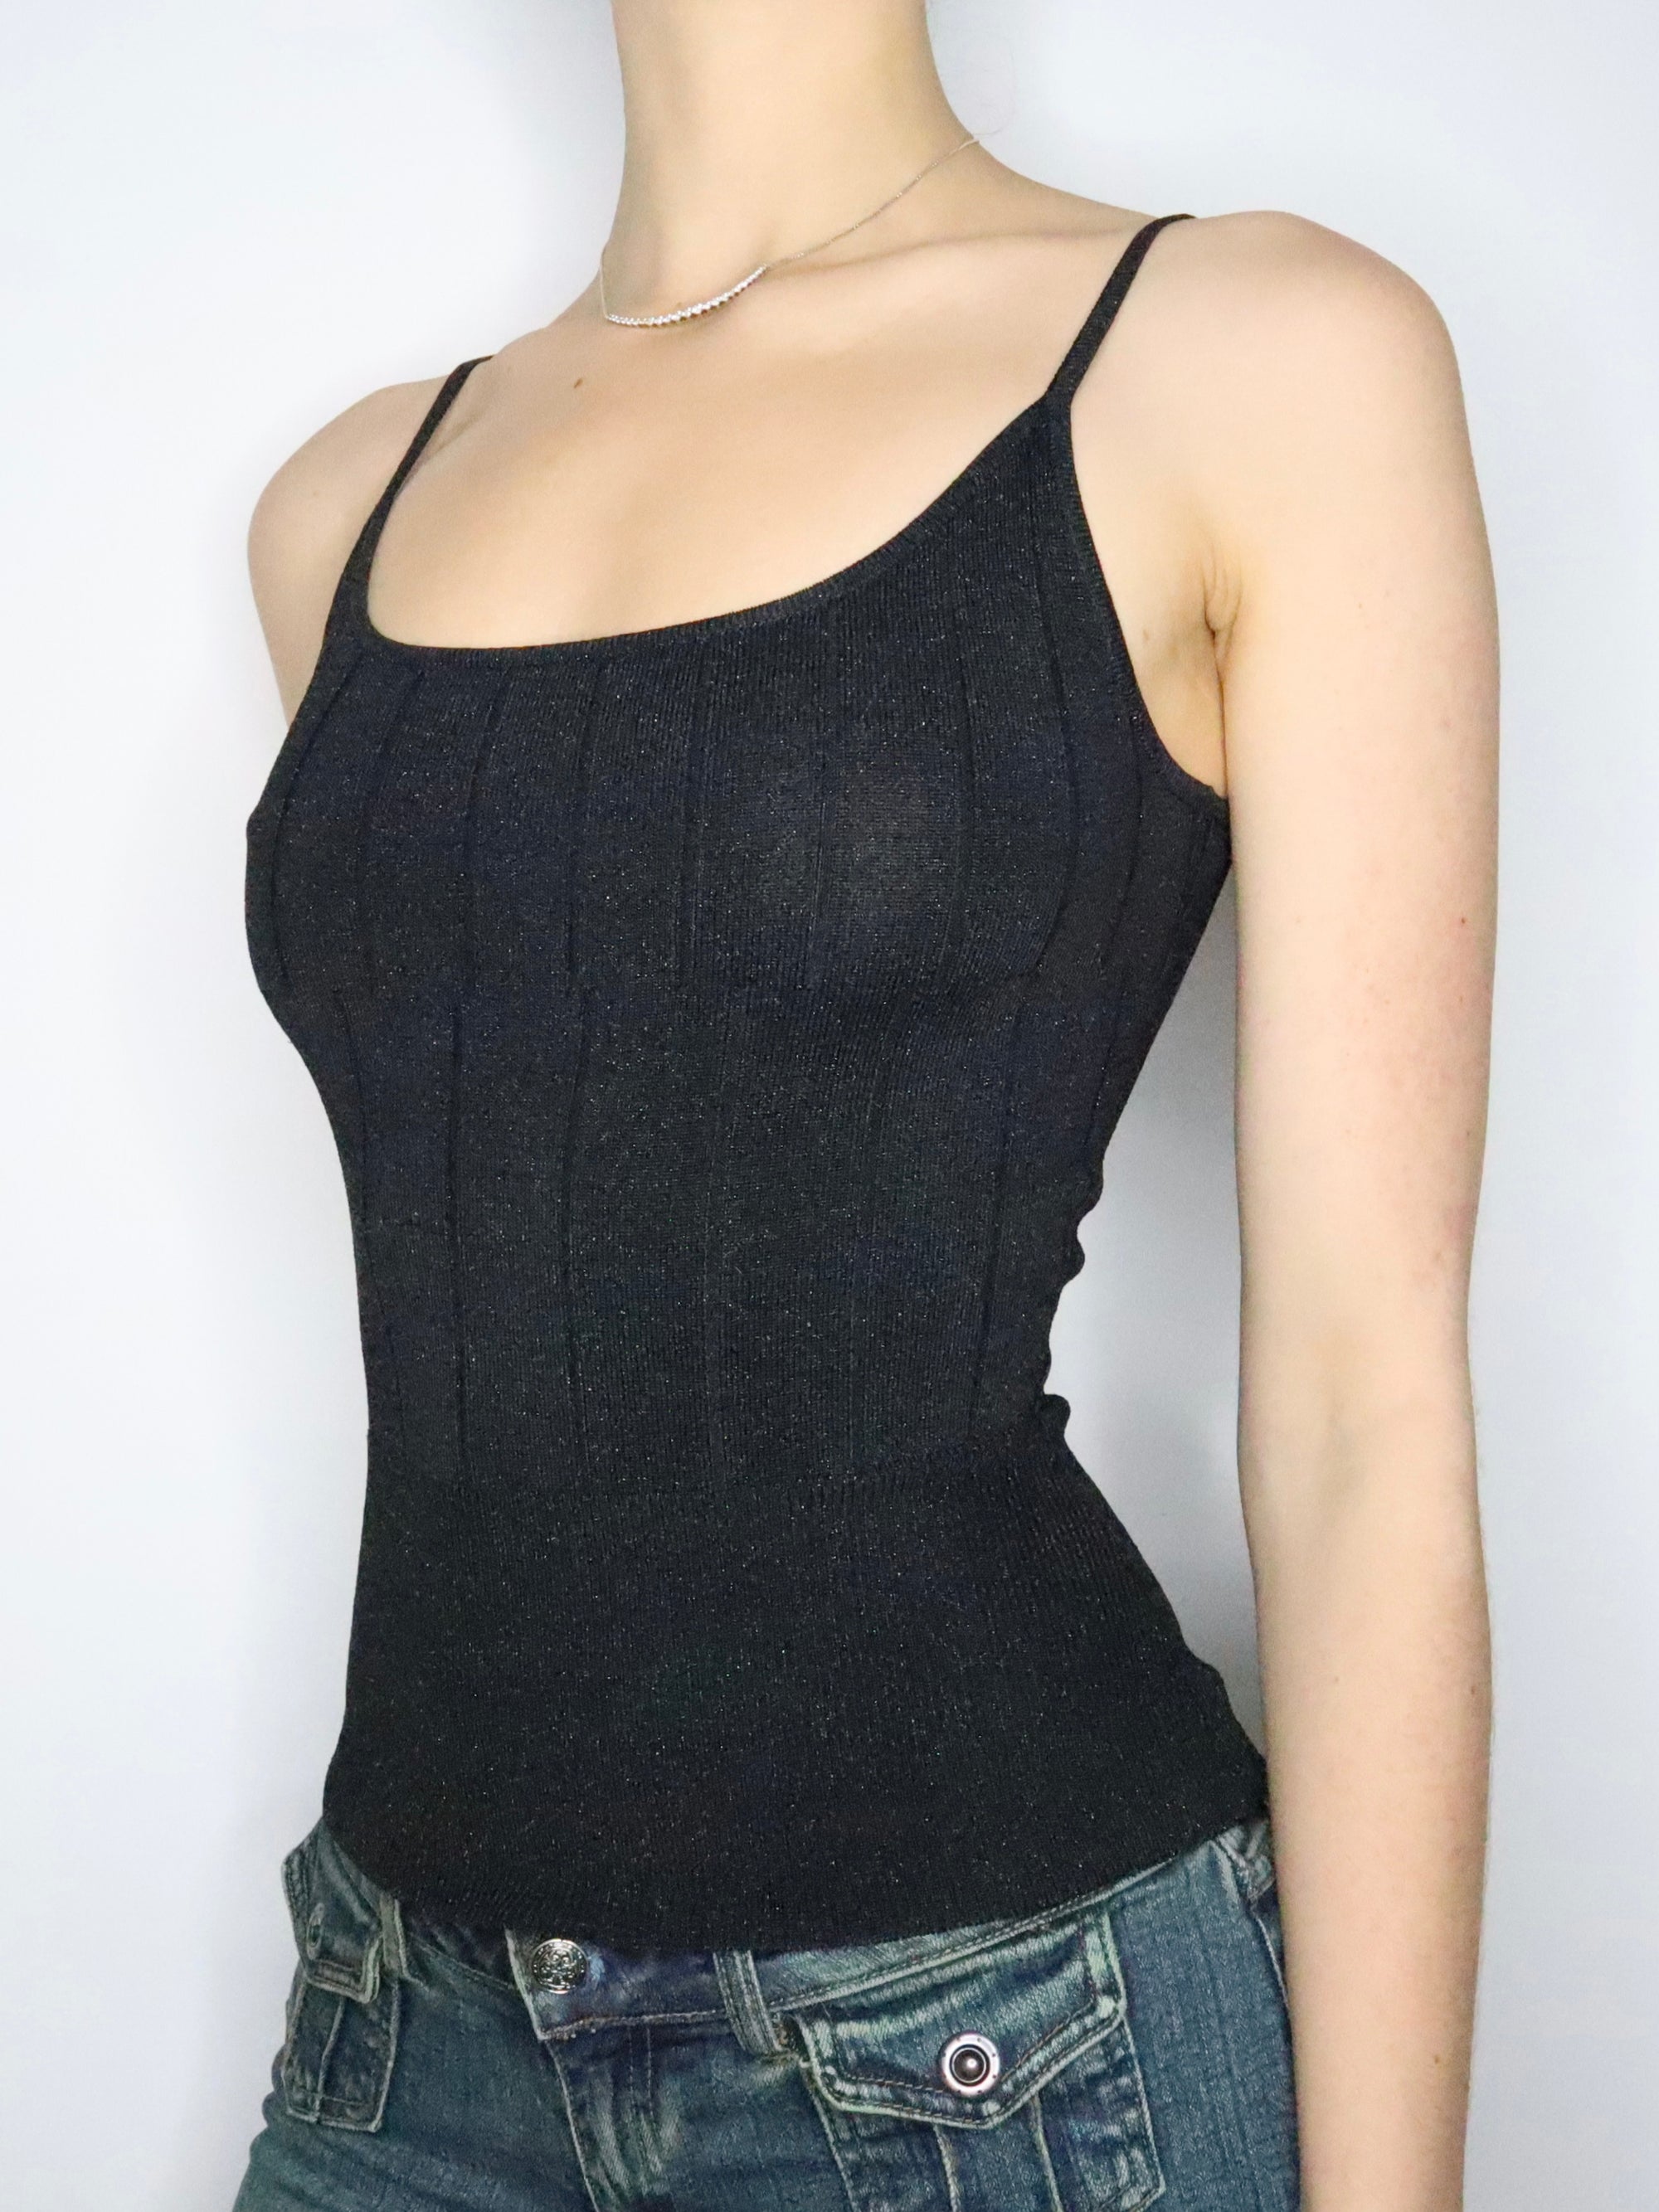 Guess Shimmery Black Cami (XS-S) 